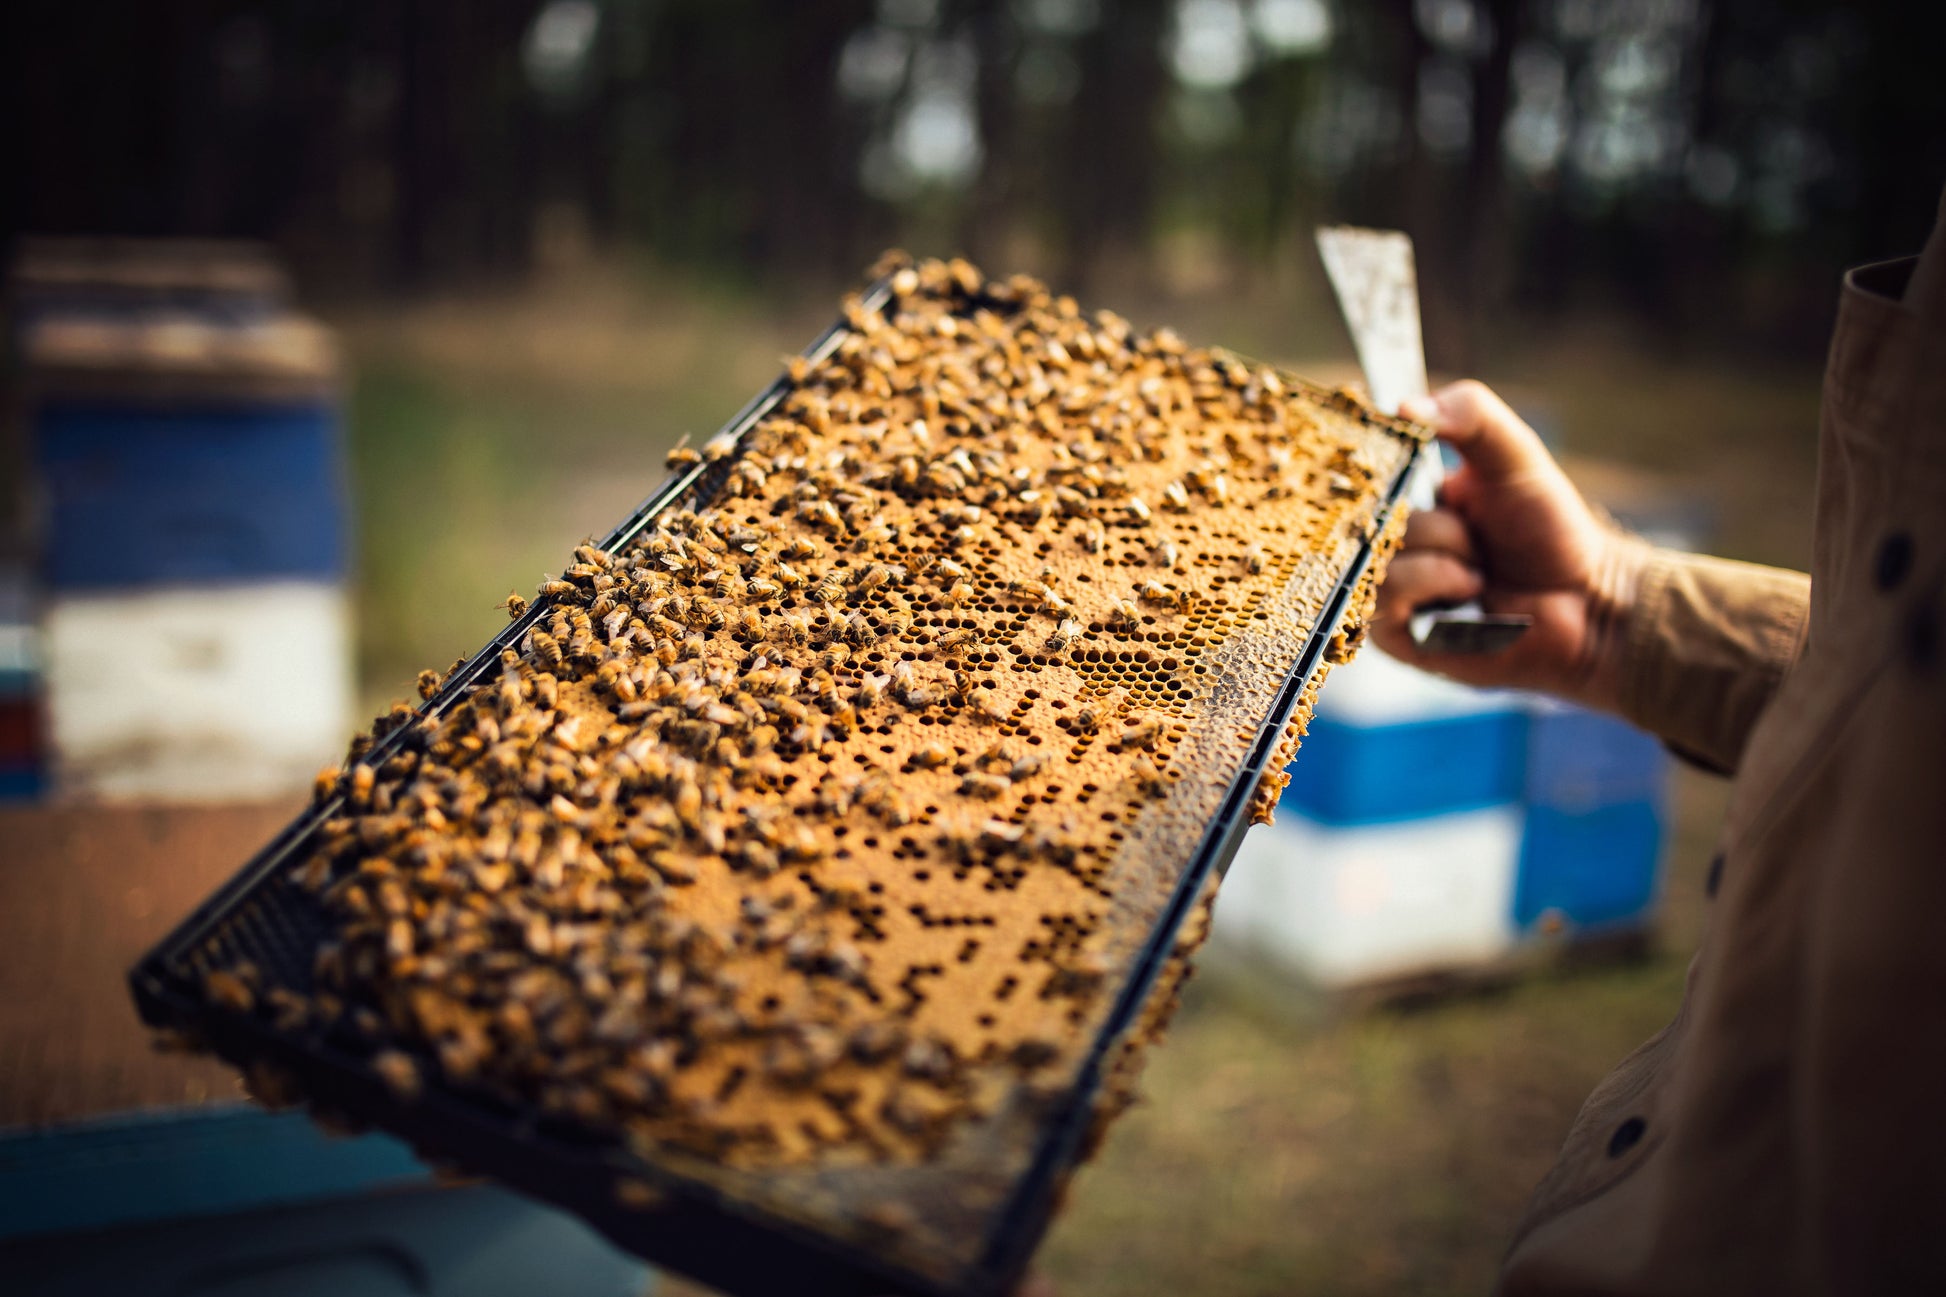 beekeeper shows how much honeycomb is in the frame